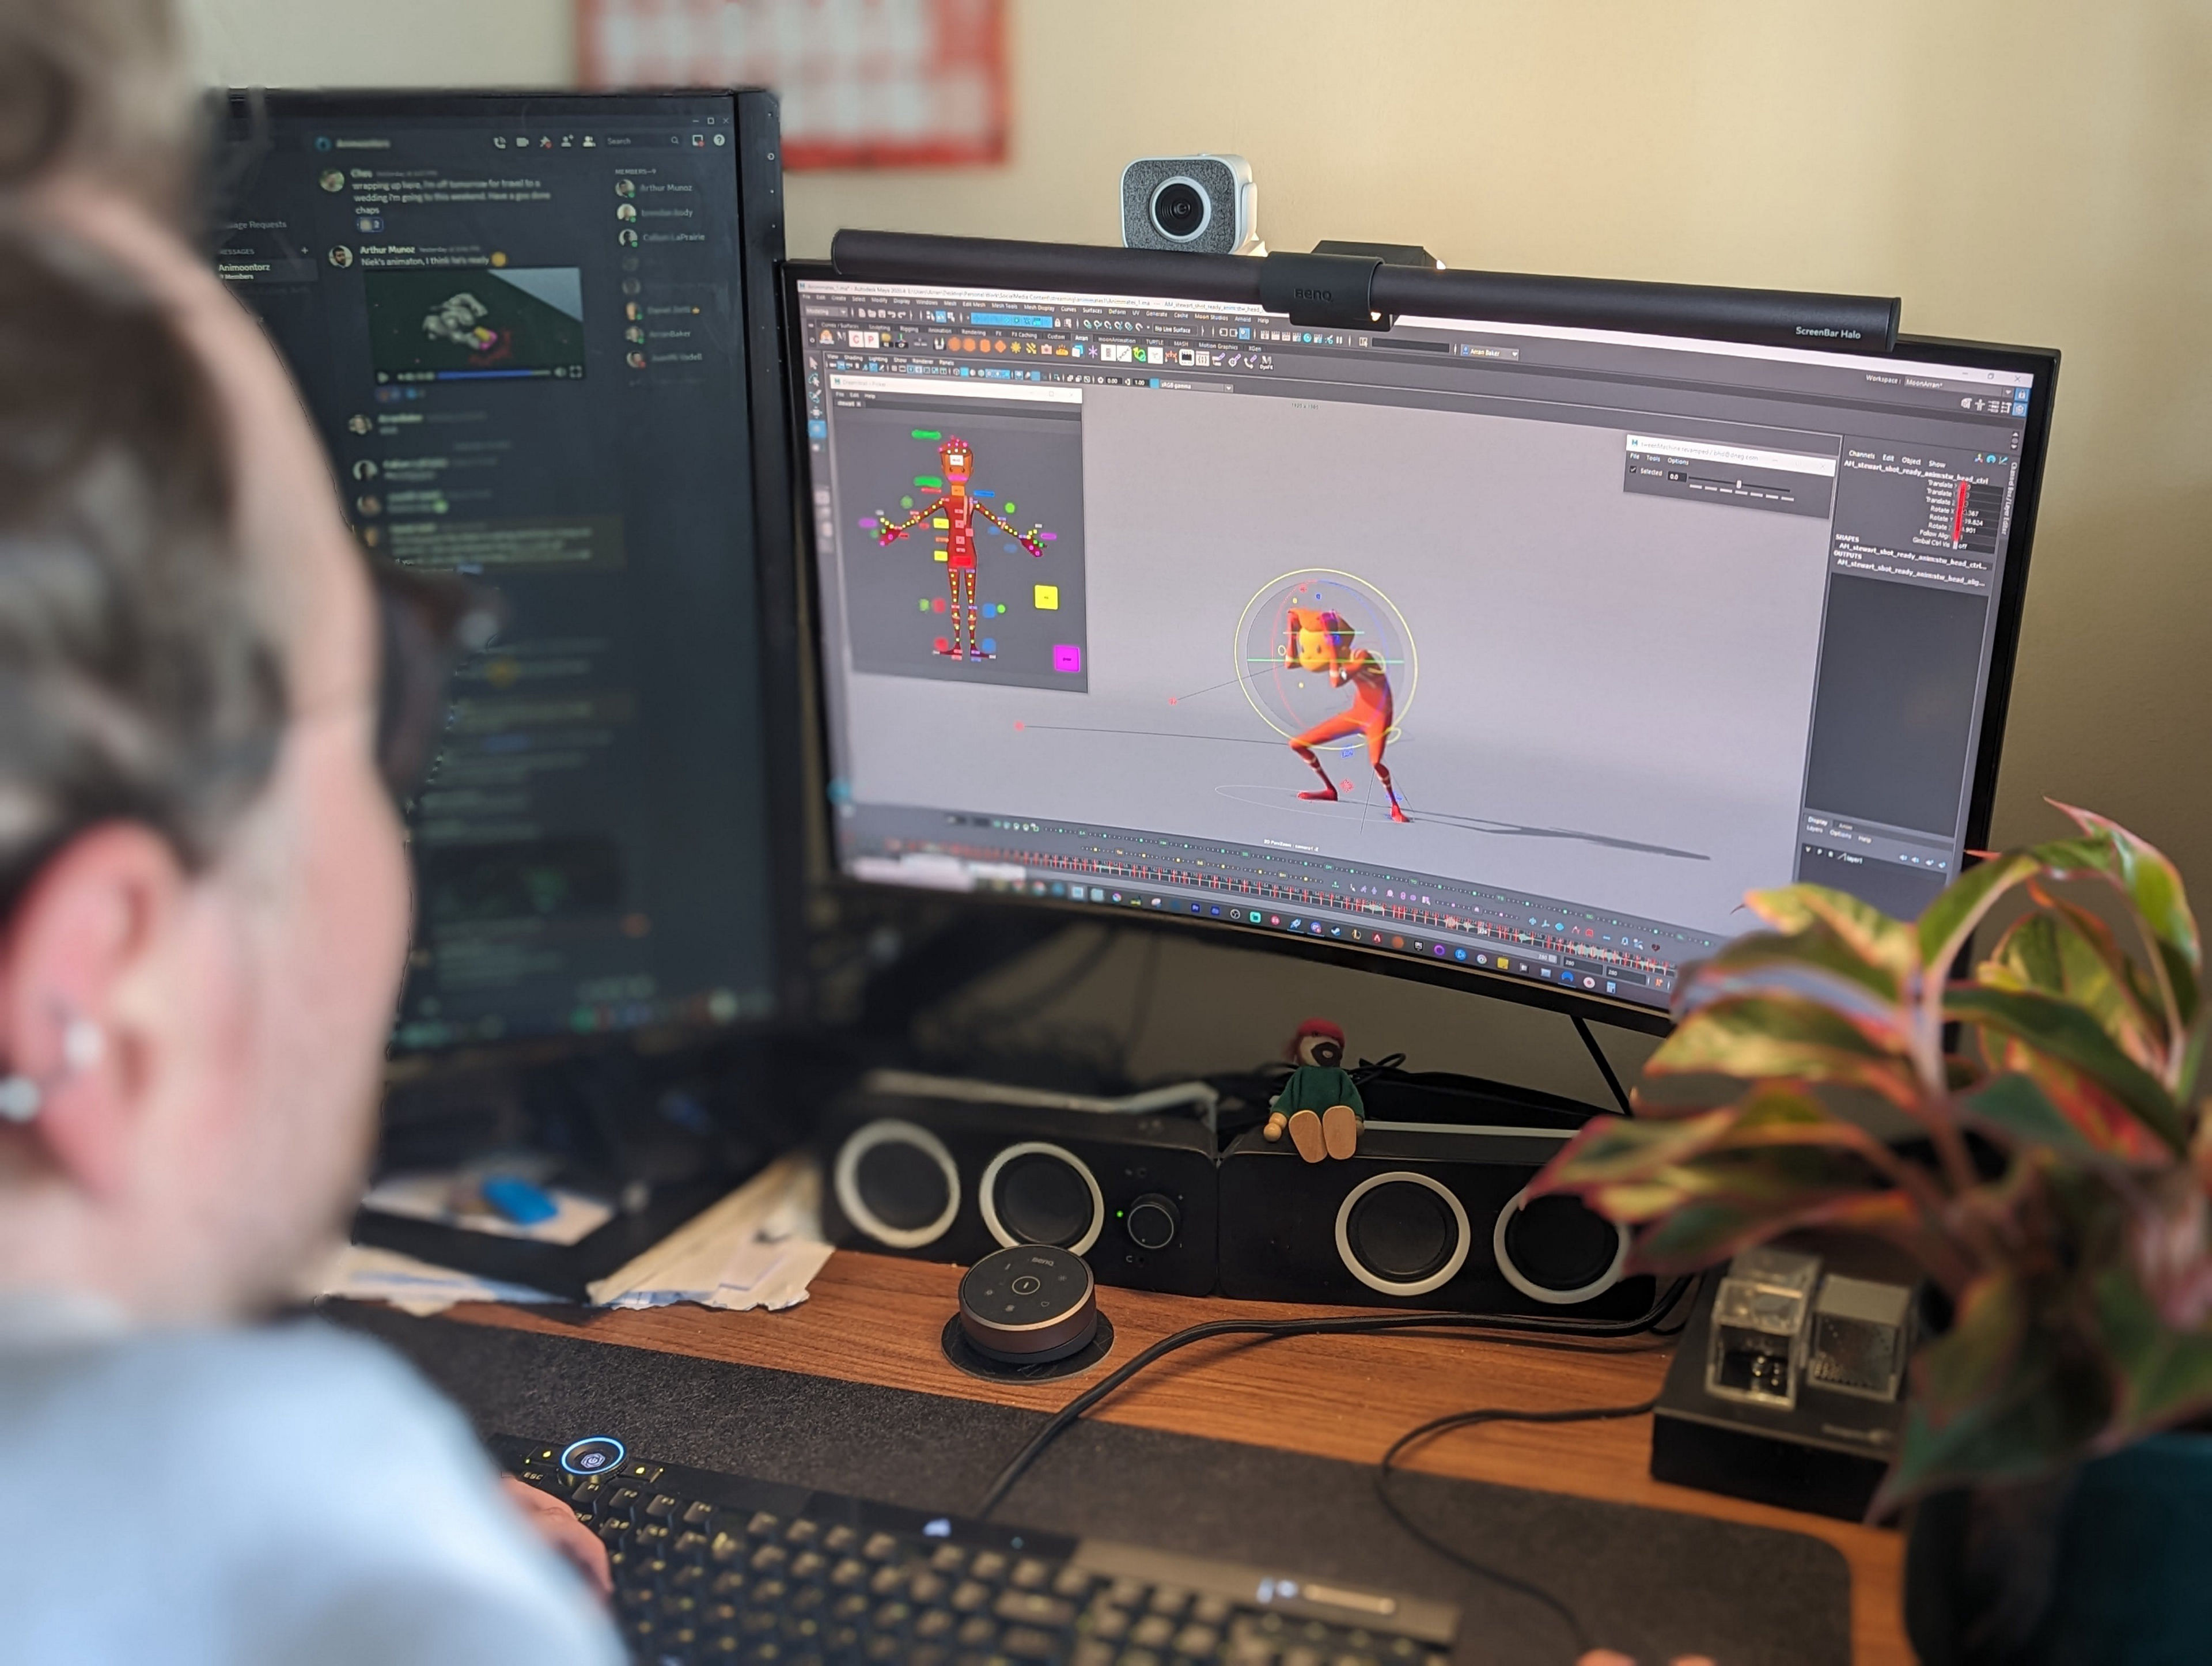 Arran Baker, one of the animators of Spider-Man: Across the Spider-Verse, uses BenQ's ScreenBar Halo monitor light during his work on animation.